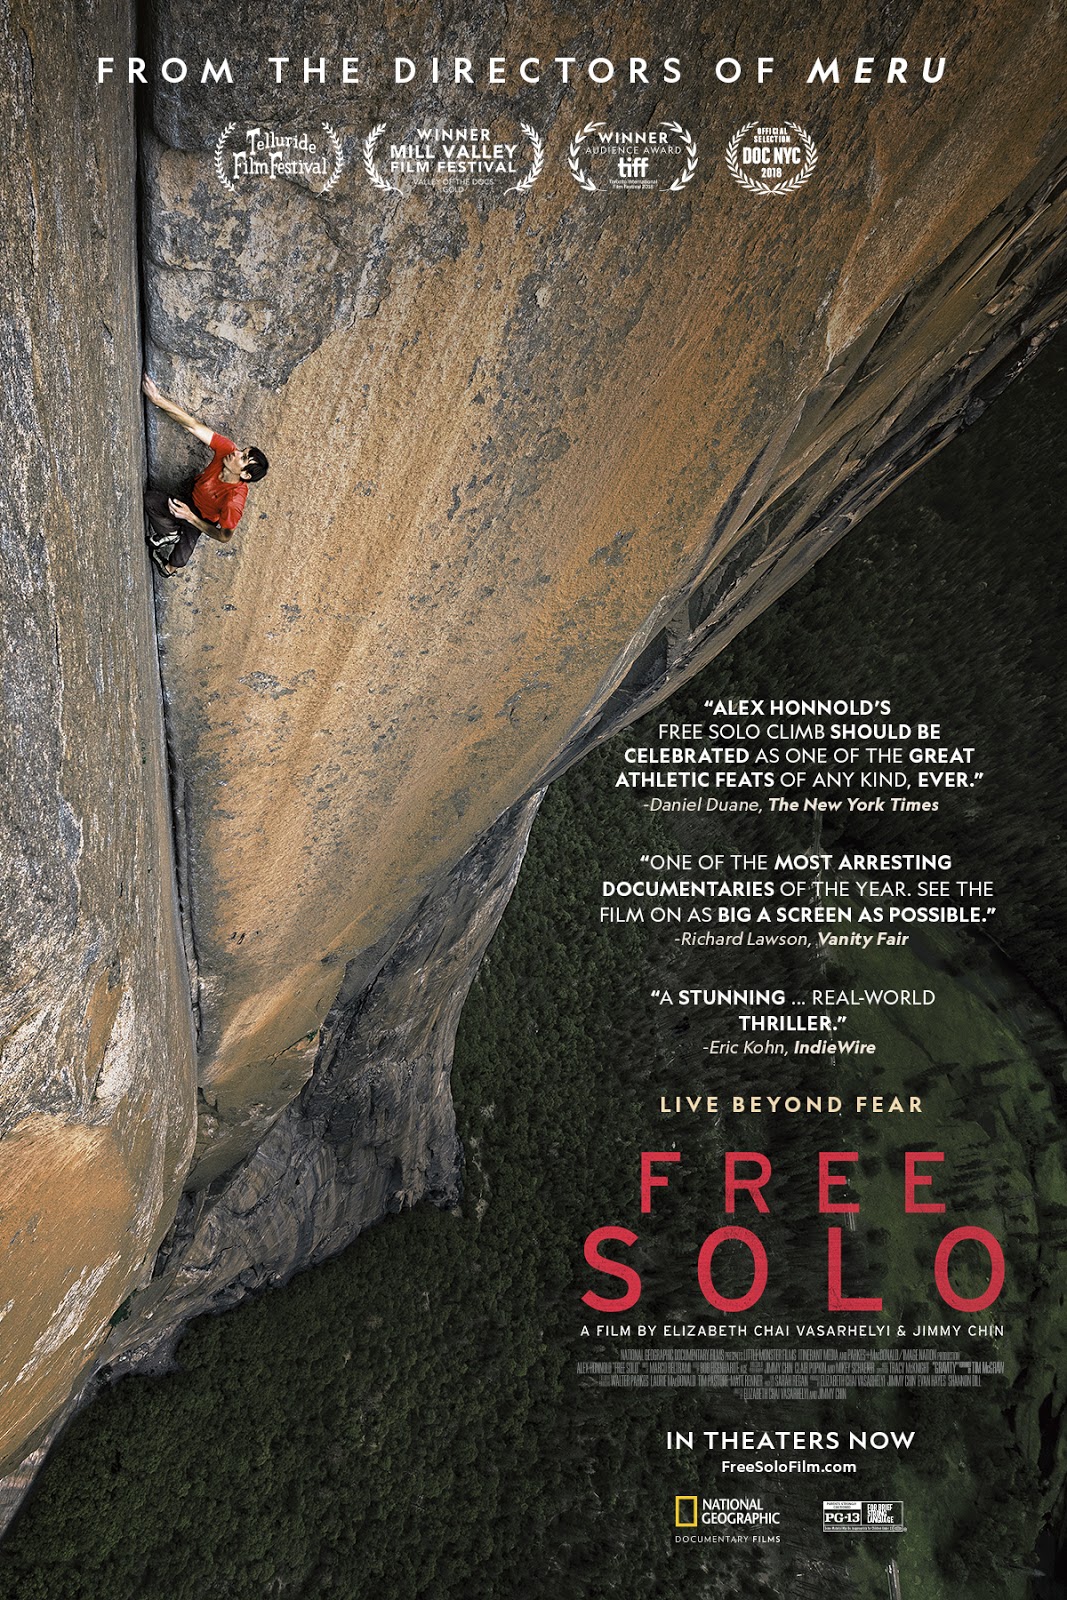 https://www.nationalgeographic.com/films/free-solo/